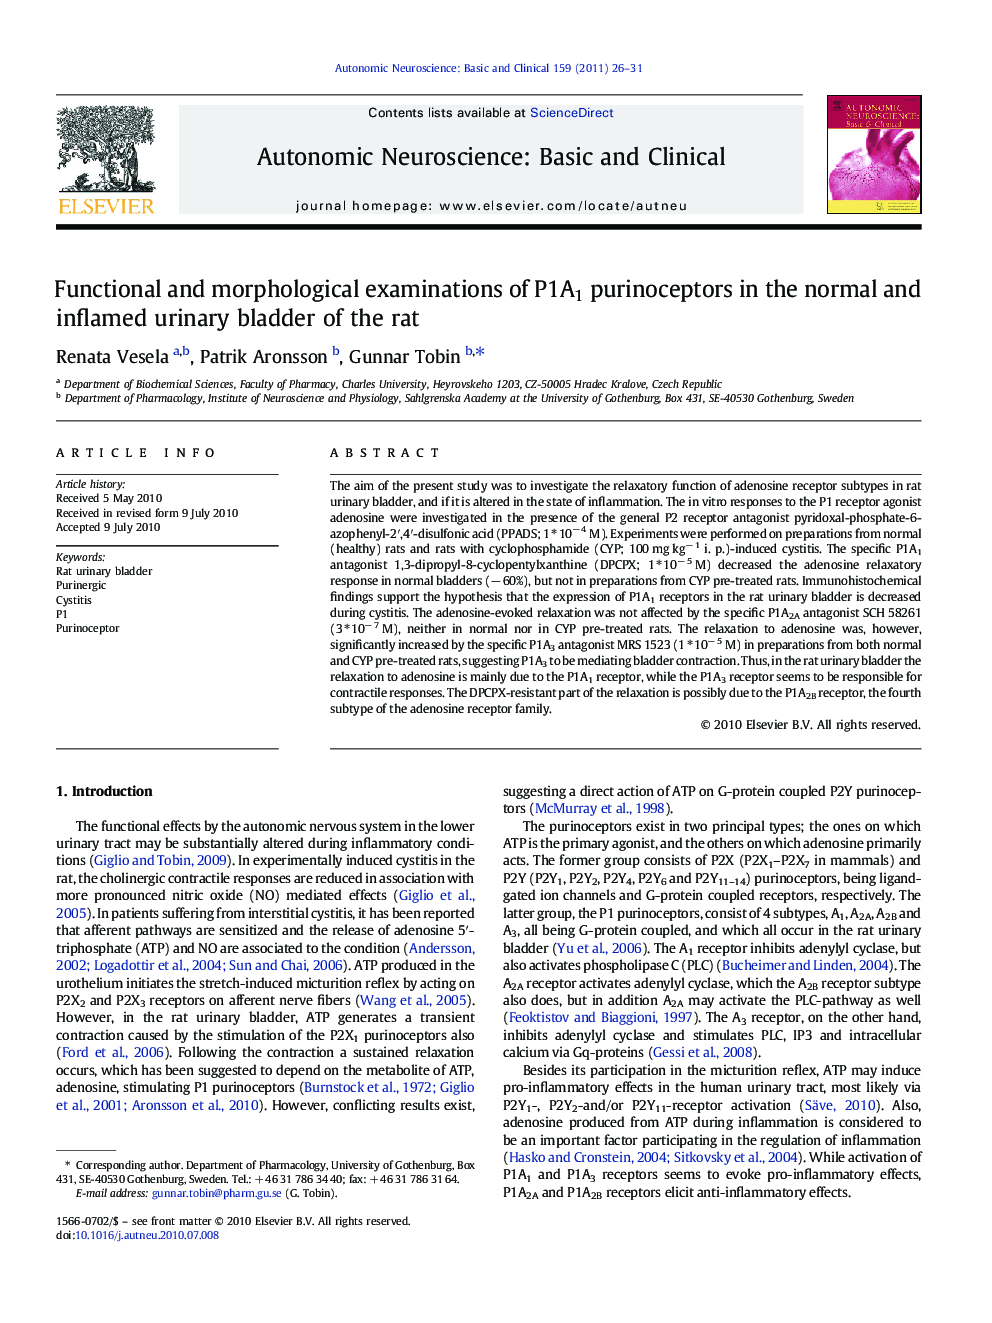 Functional and morphological examinations of P1A1 purinoceptors in the normal and inflamed urinary bladder of the rat